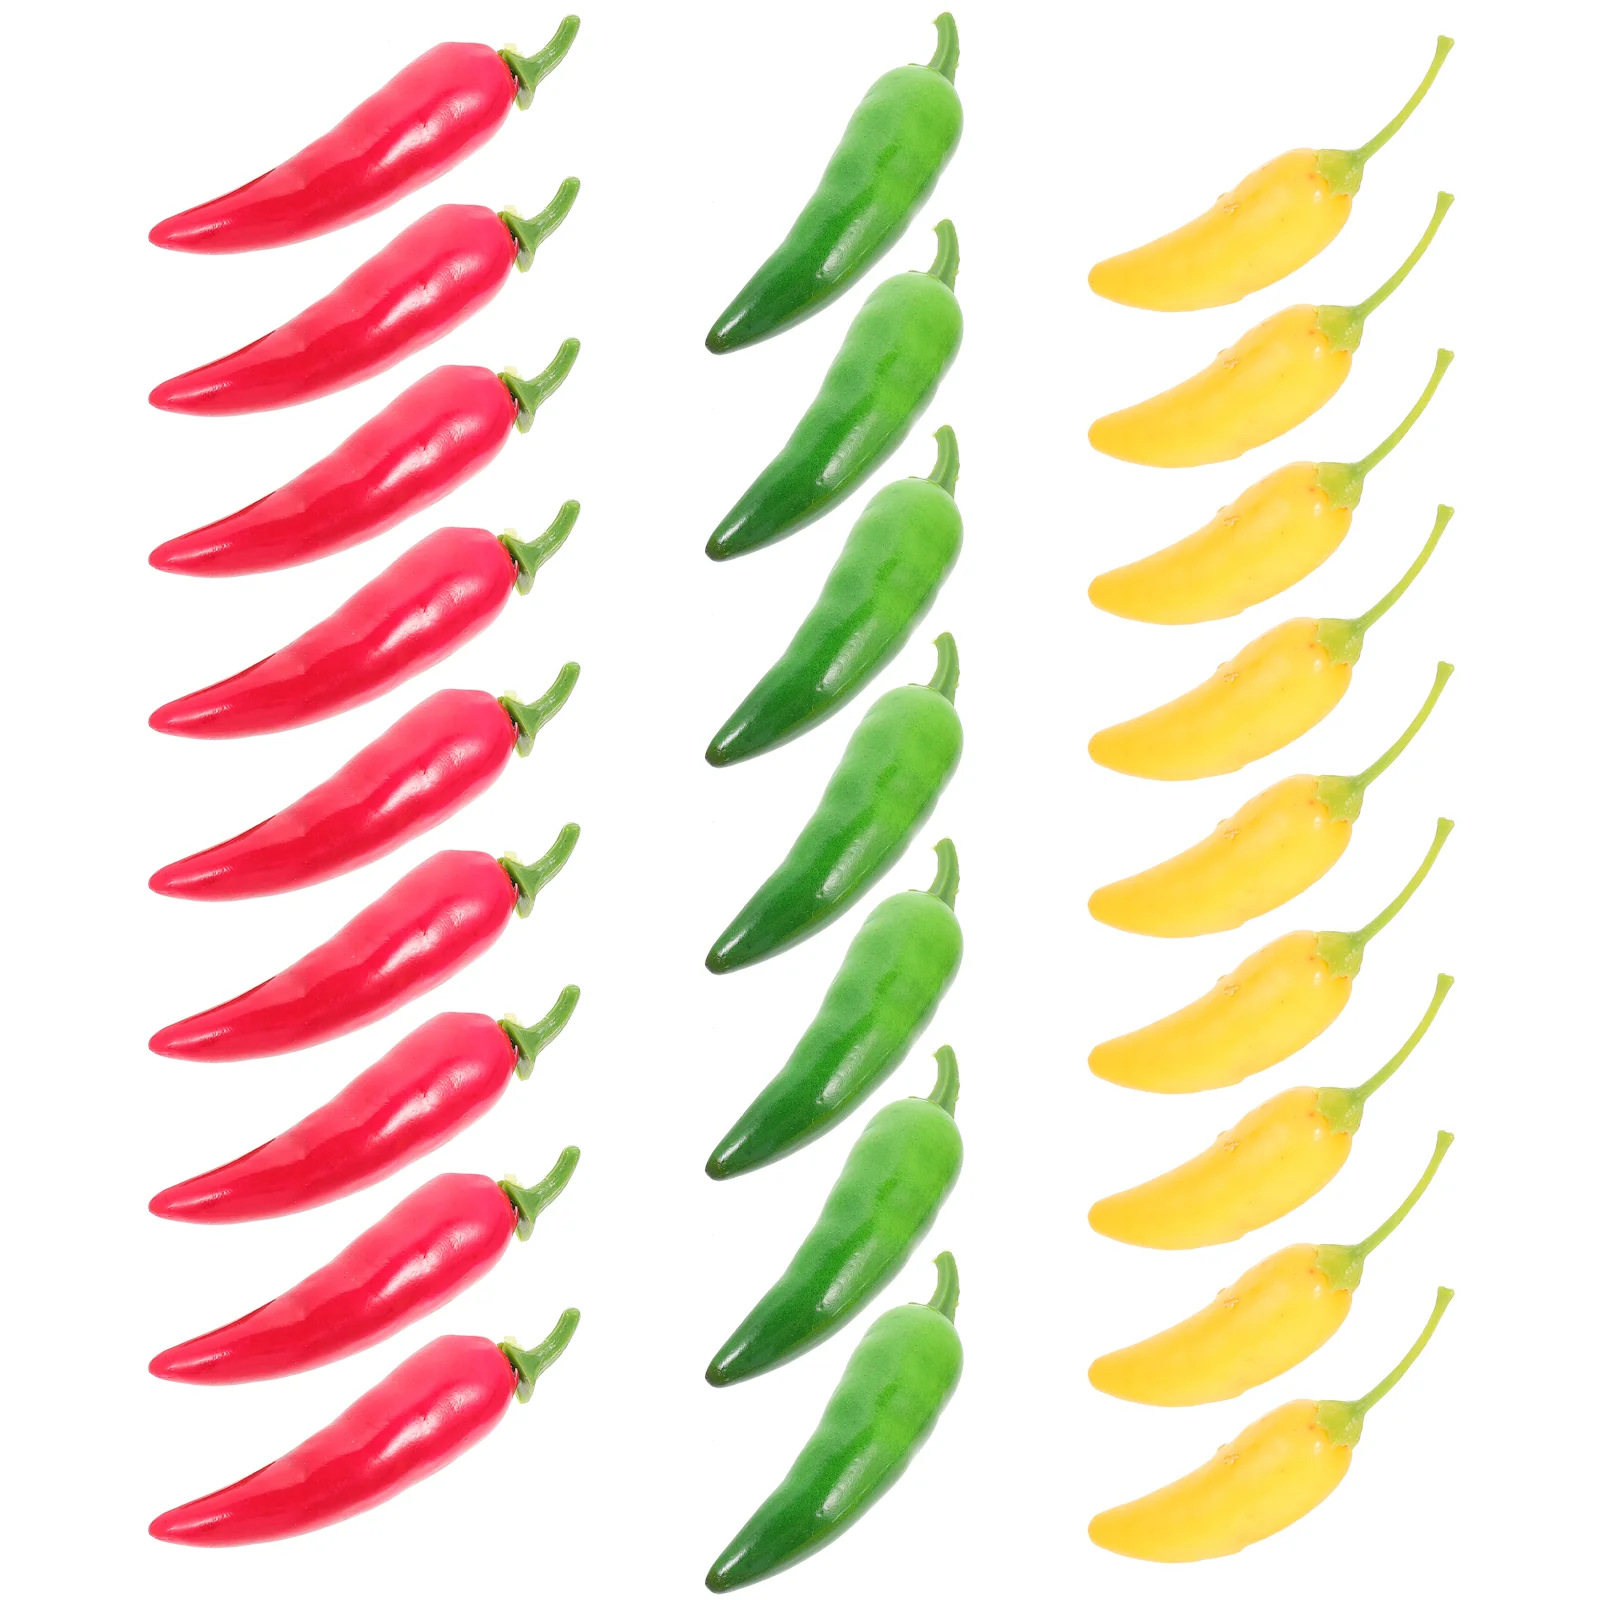 

60 Pcs Plastic Pepper Fake Hot Chili Home Decoration Simulation Vegetable Decorations Artificial Chili Peppers Mini Food Toys